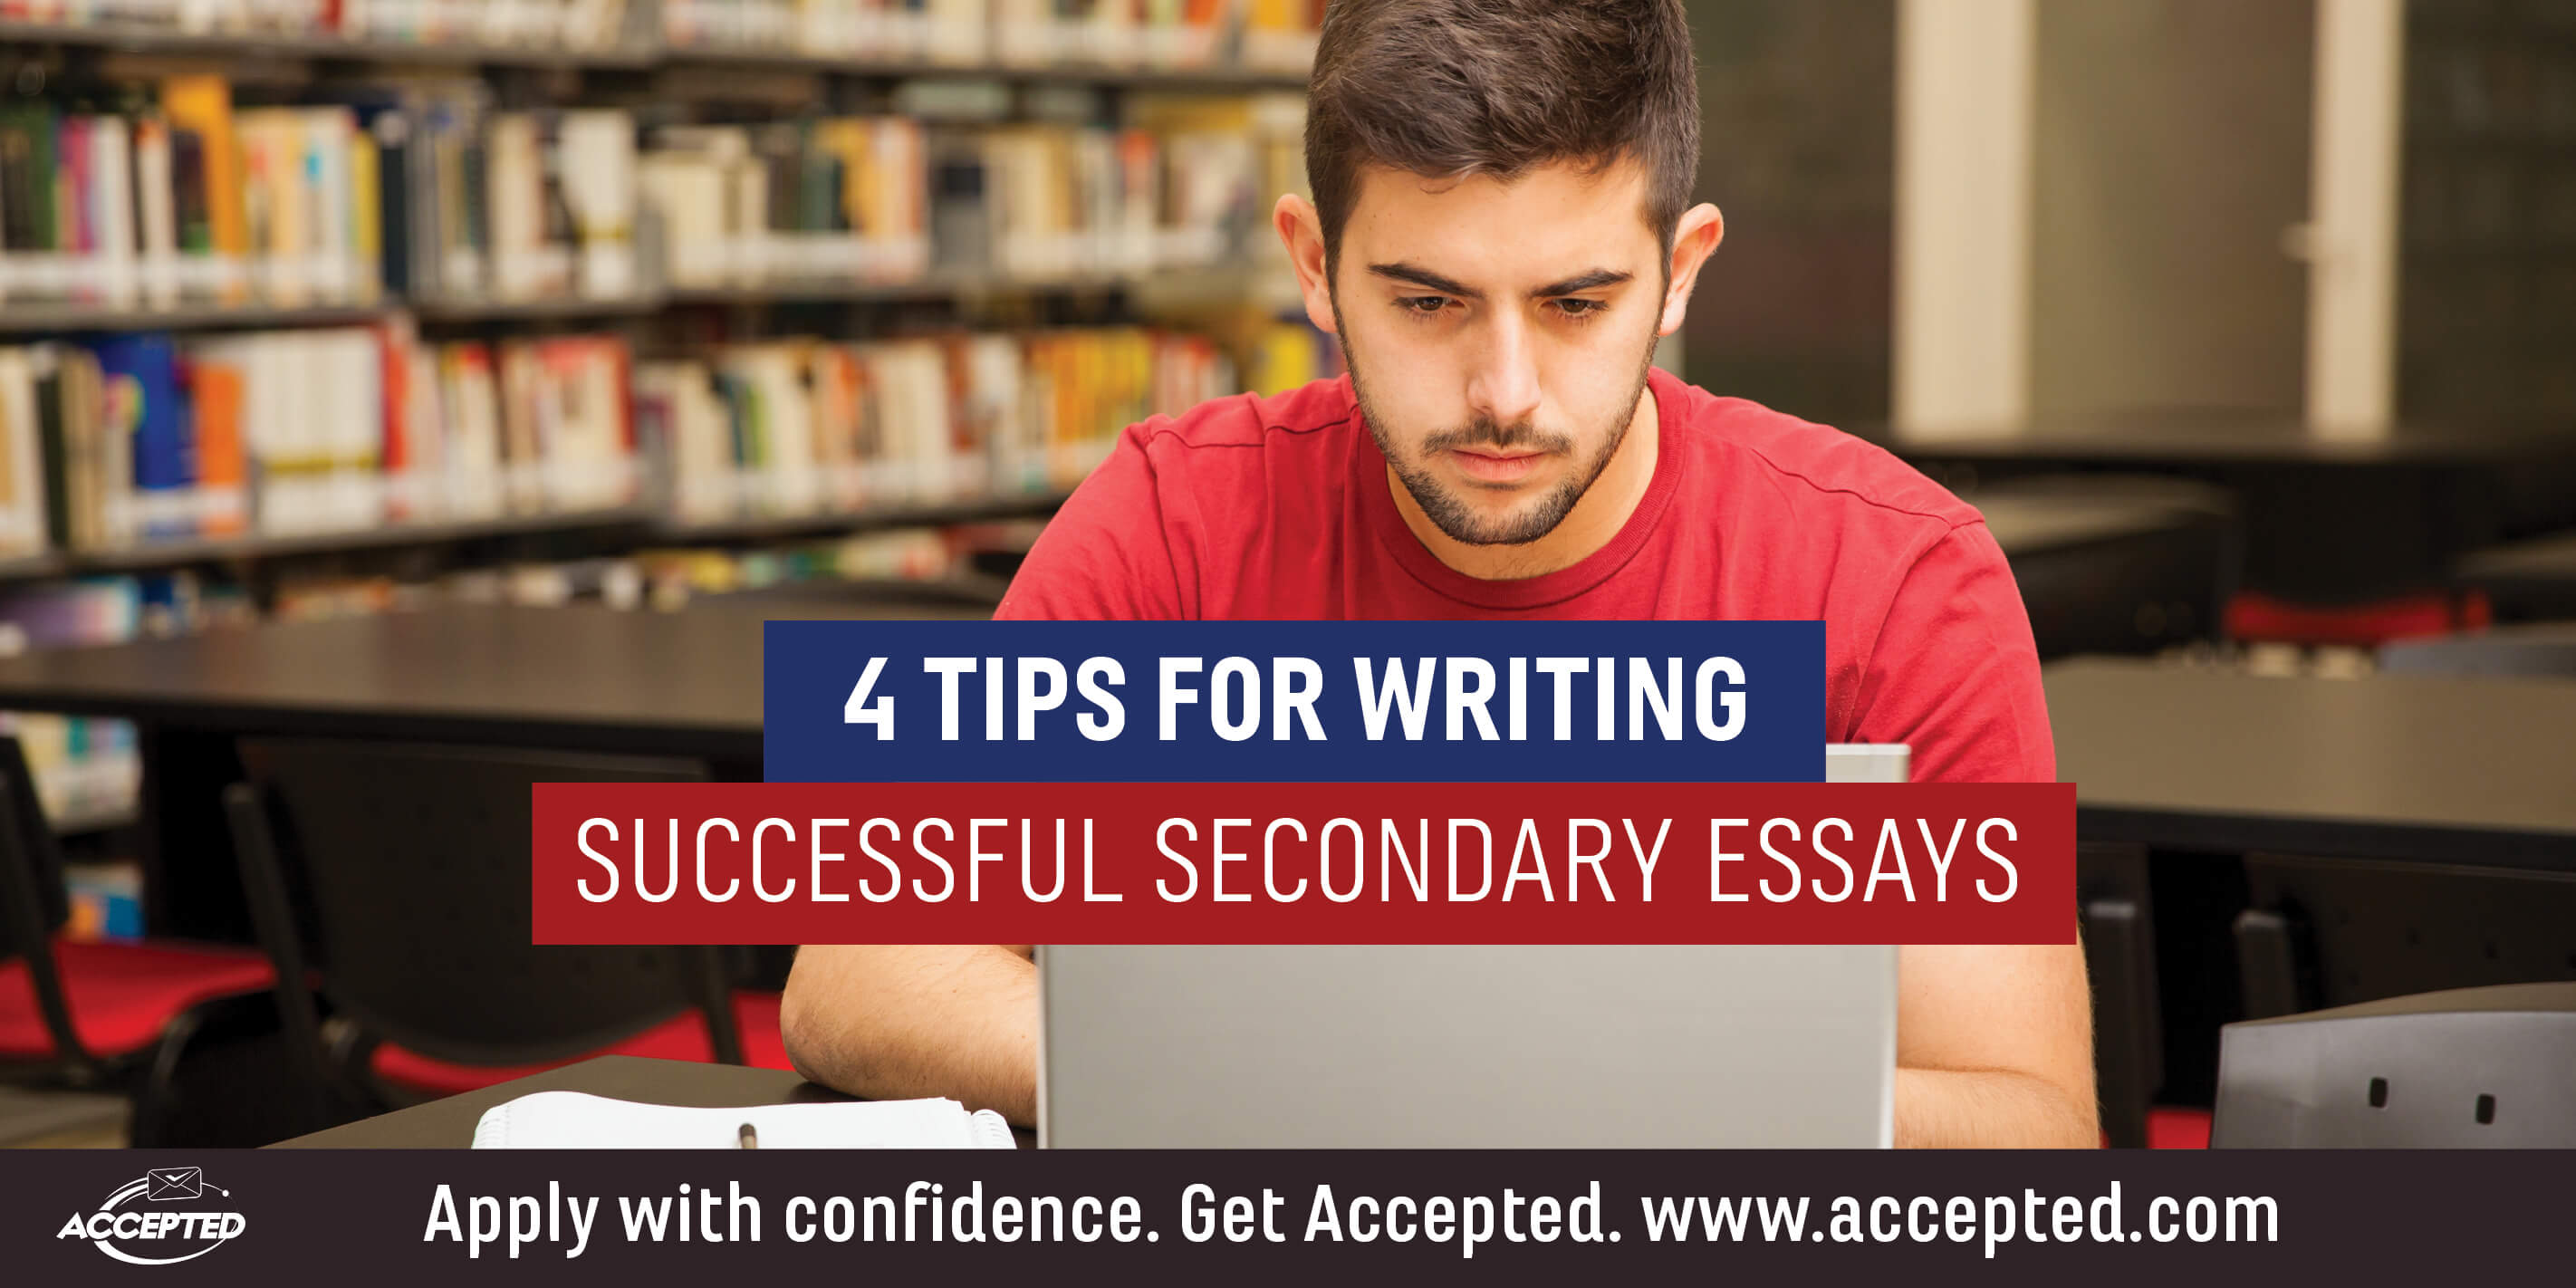 Write successful. Tips for successful writing. Get accepted to University.